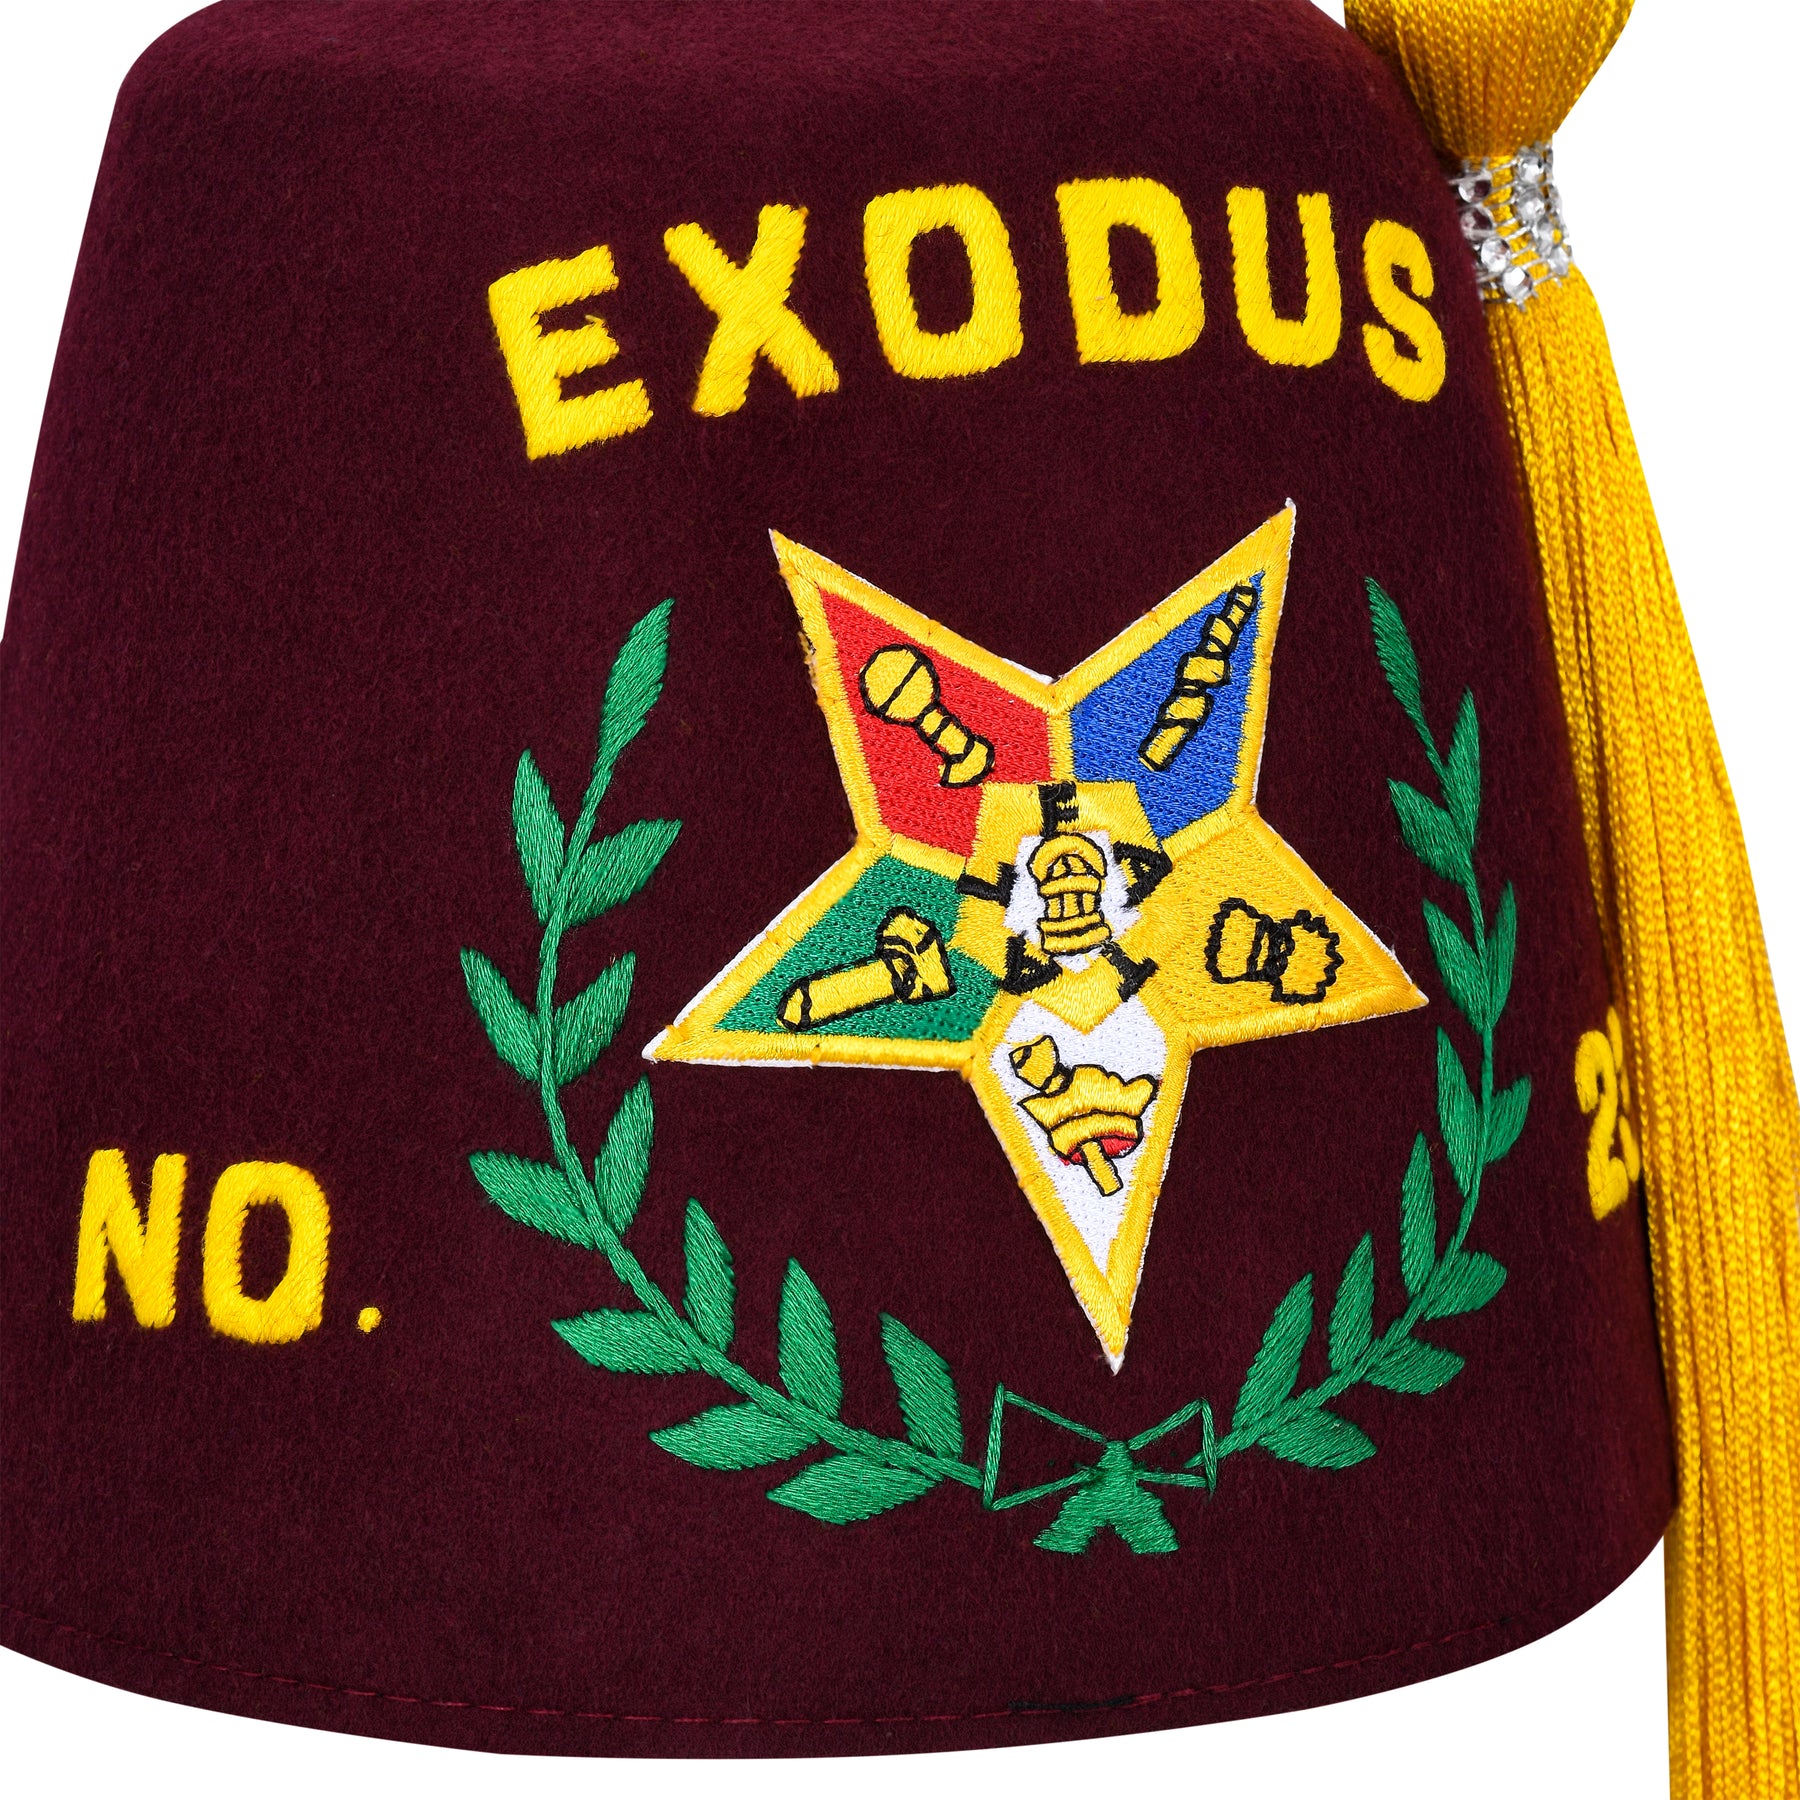 Order of the Amaranth Fez Hat - With OES Star - Bricks Masons